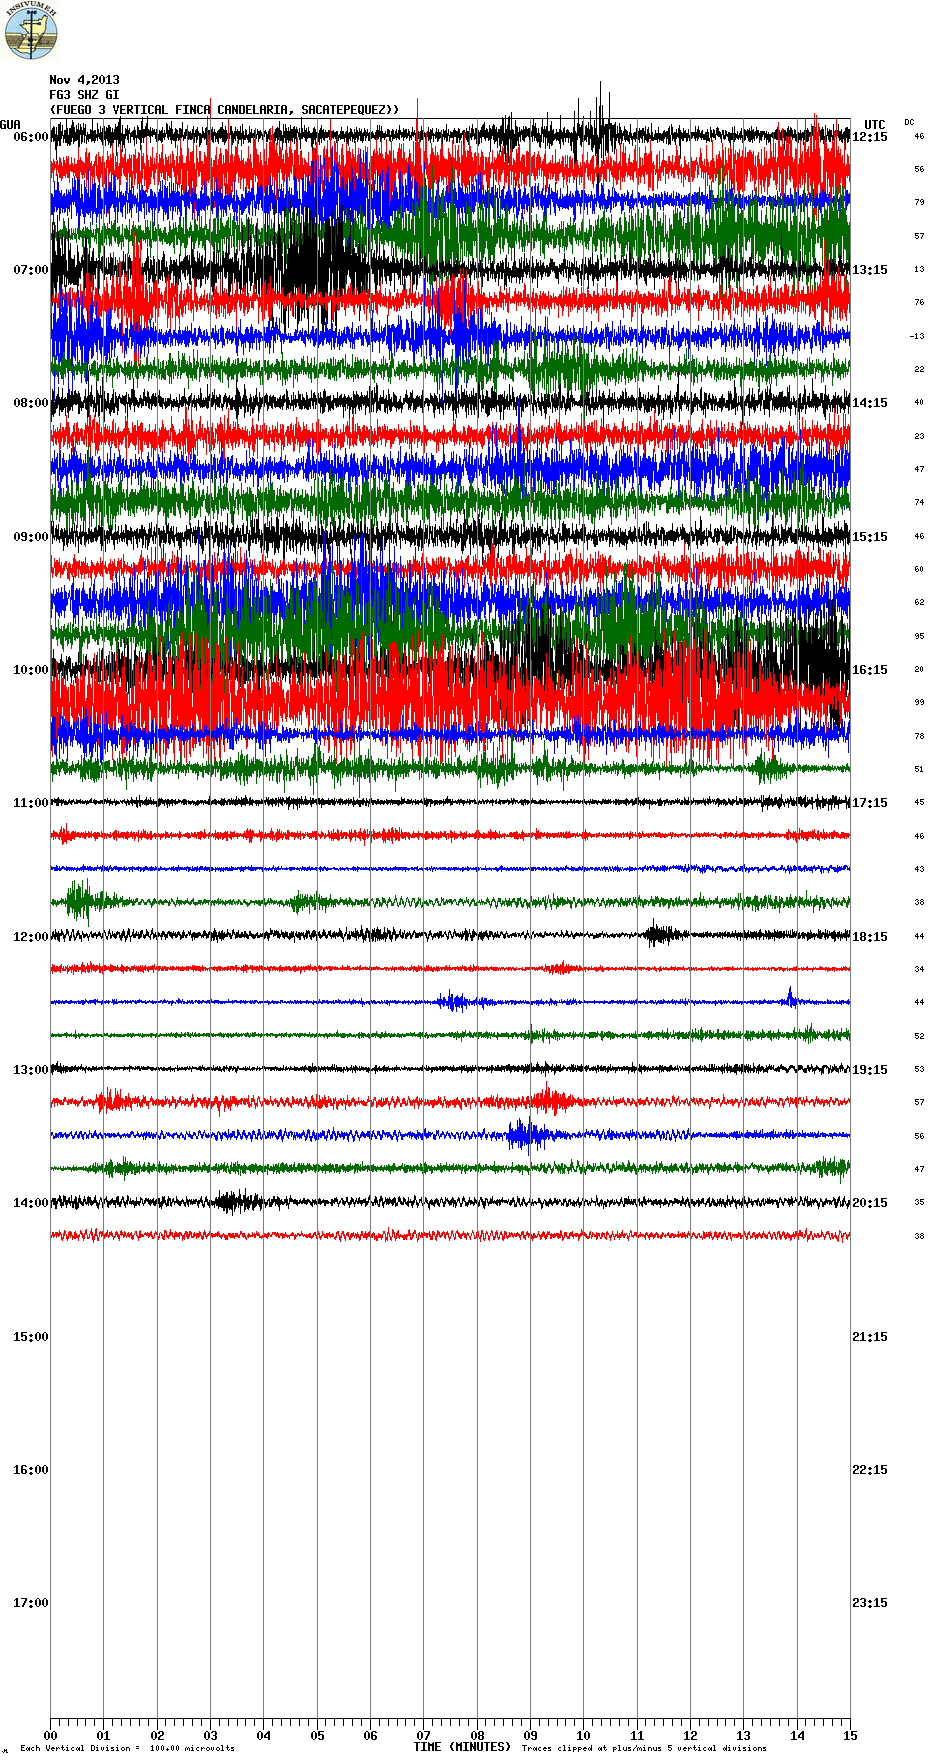 Current seismic signal from Fuego volcano (FG3 station, INSIVUMEH)